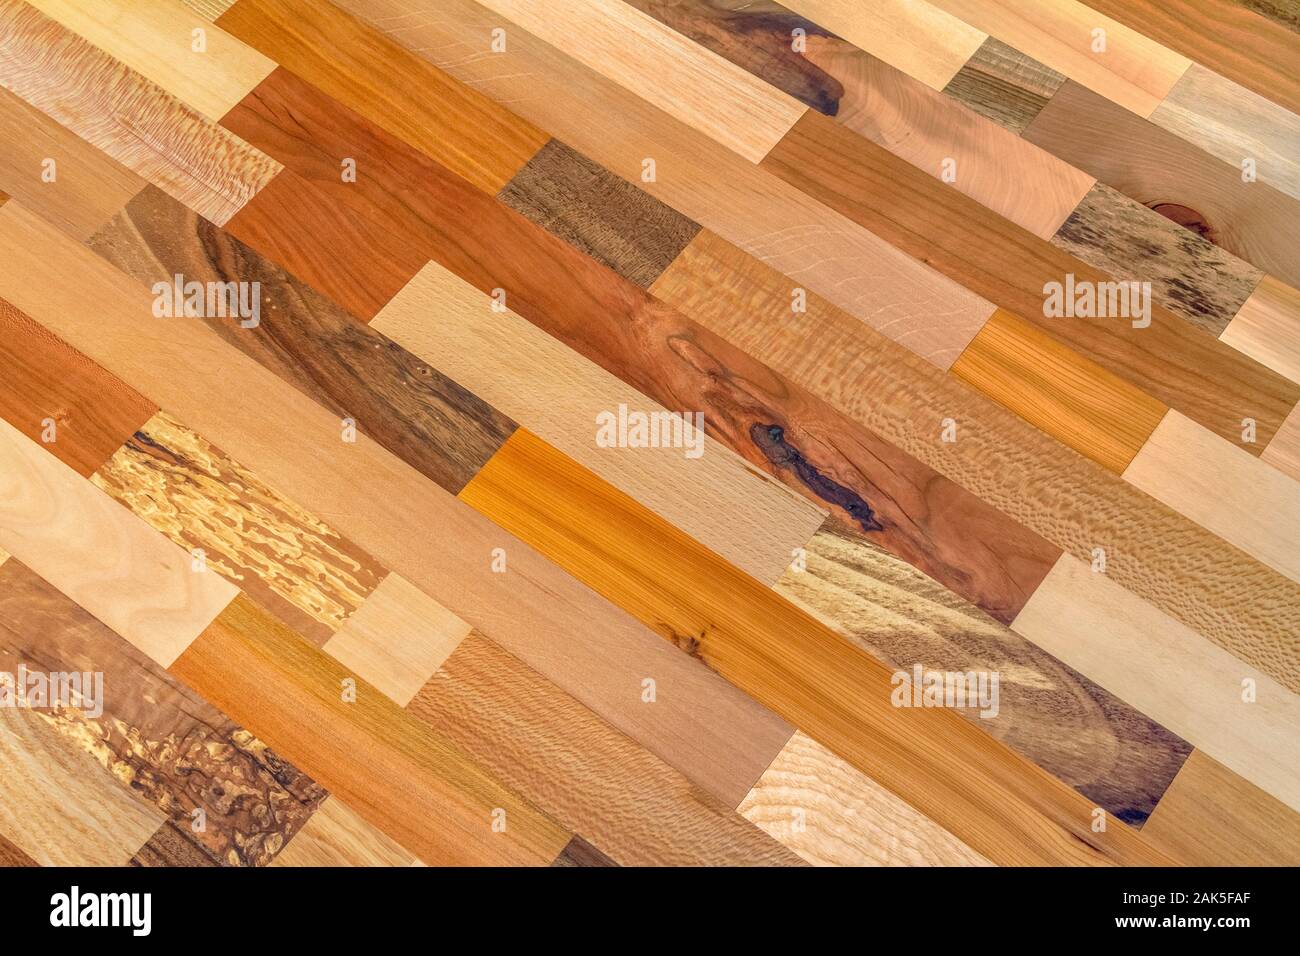 full frame abstract wooden Parquetry background made of mixed wood types Stock Photo